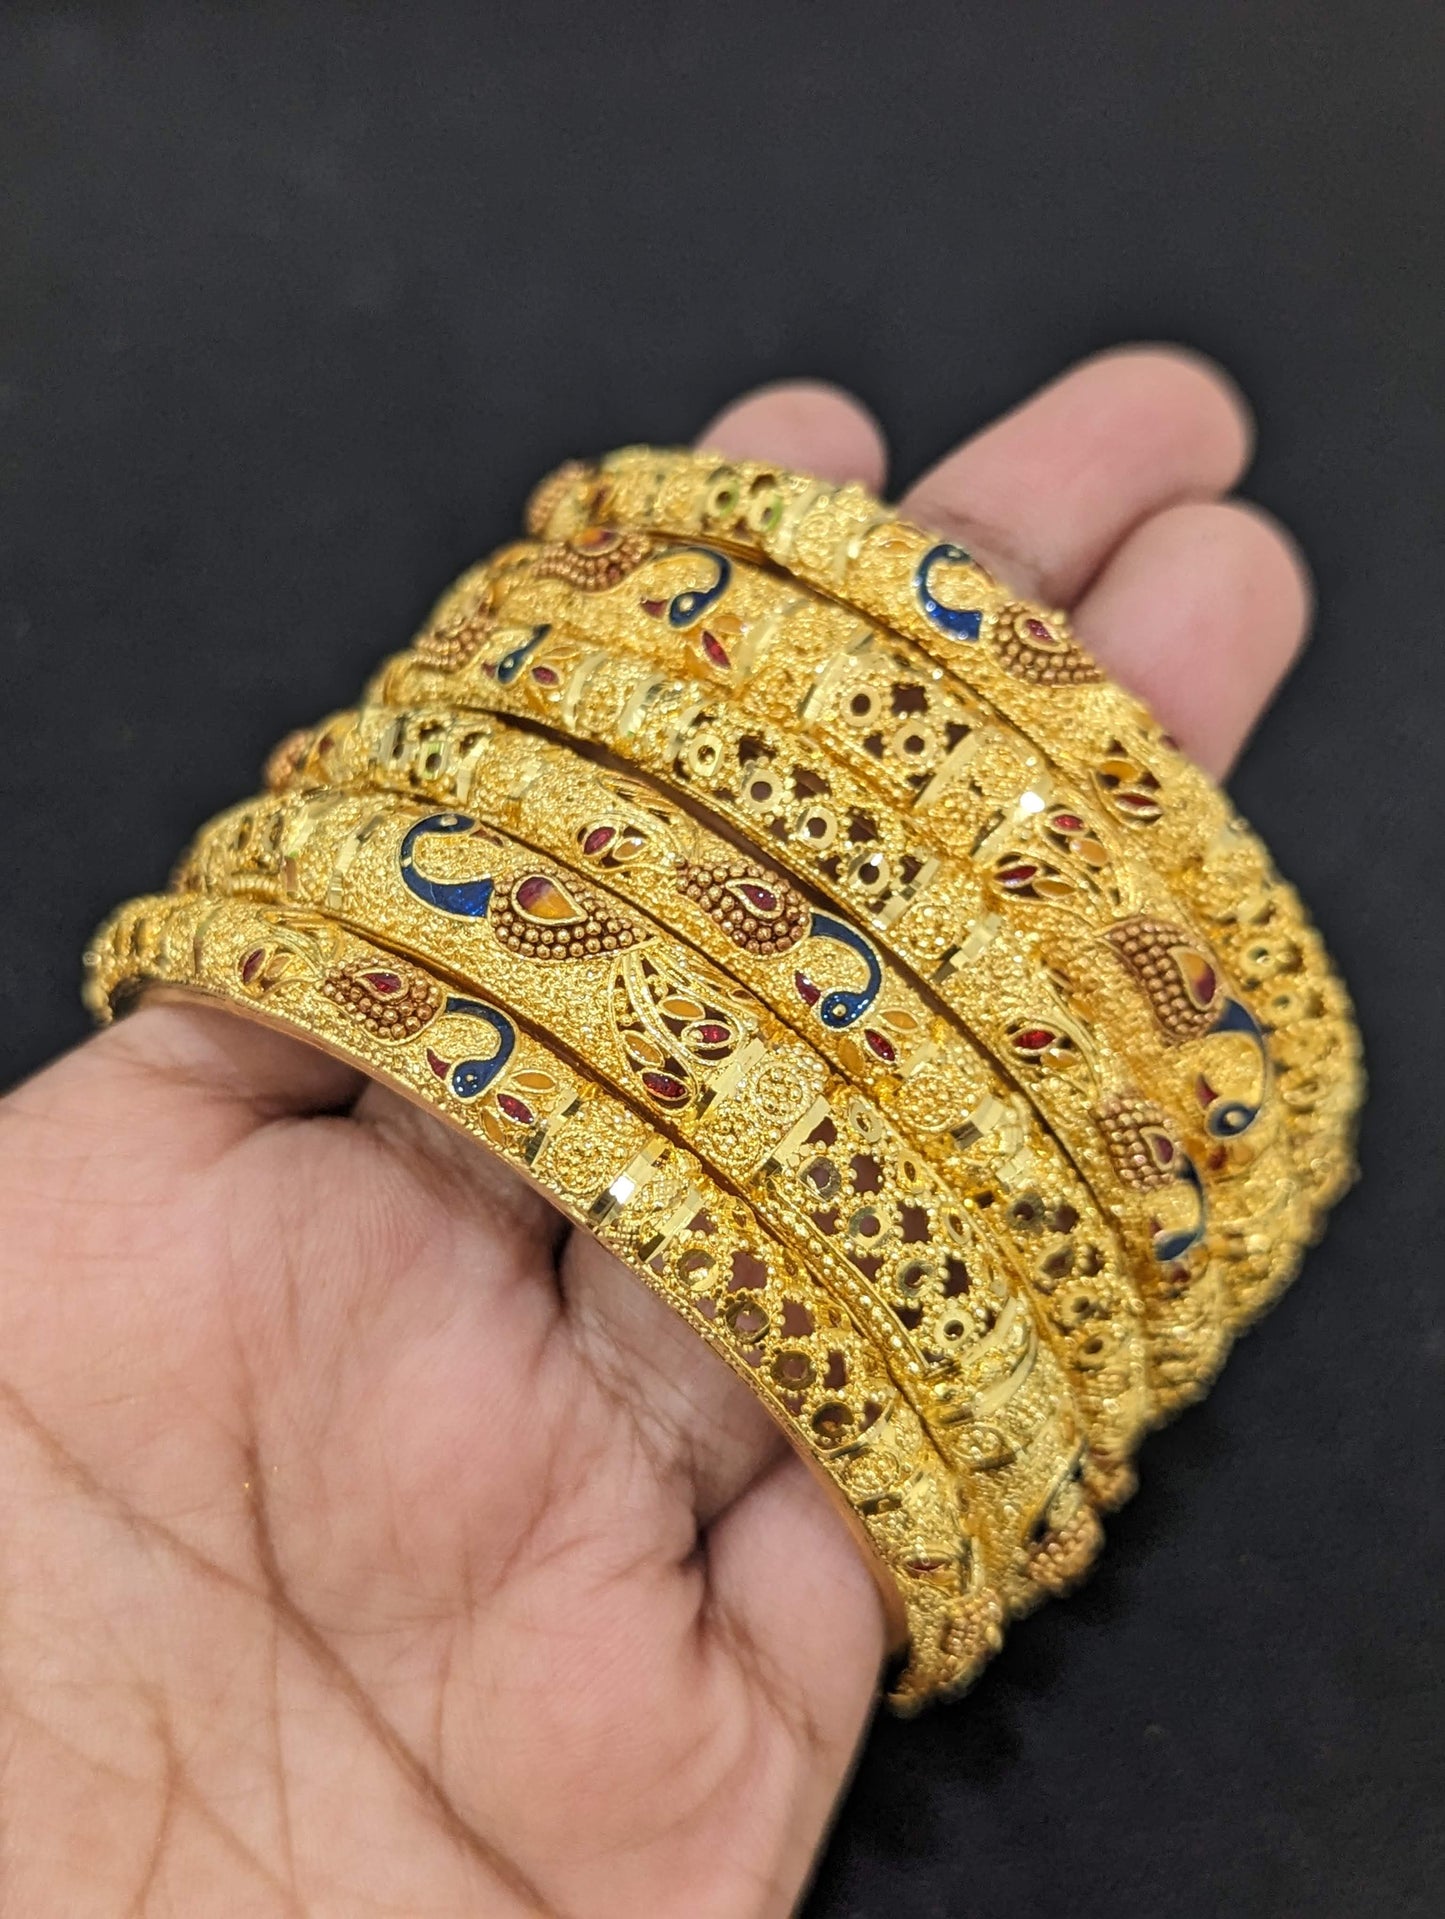 Peacock design Micro Forming Gold Plated Bangles - Set of 6